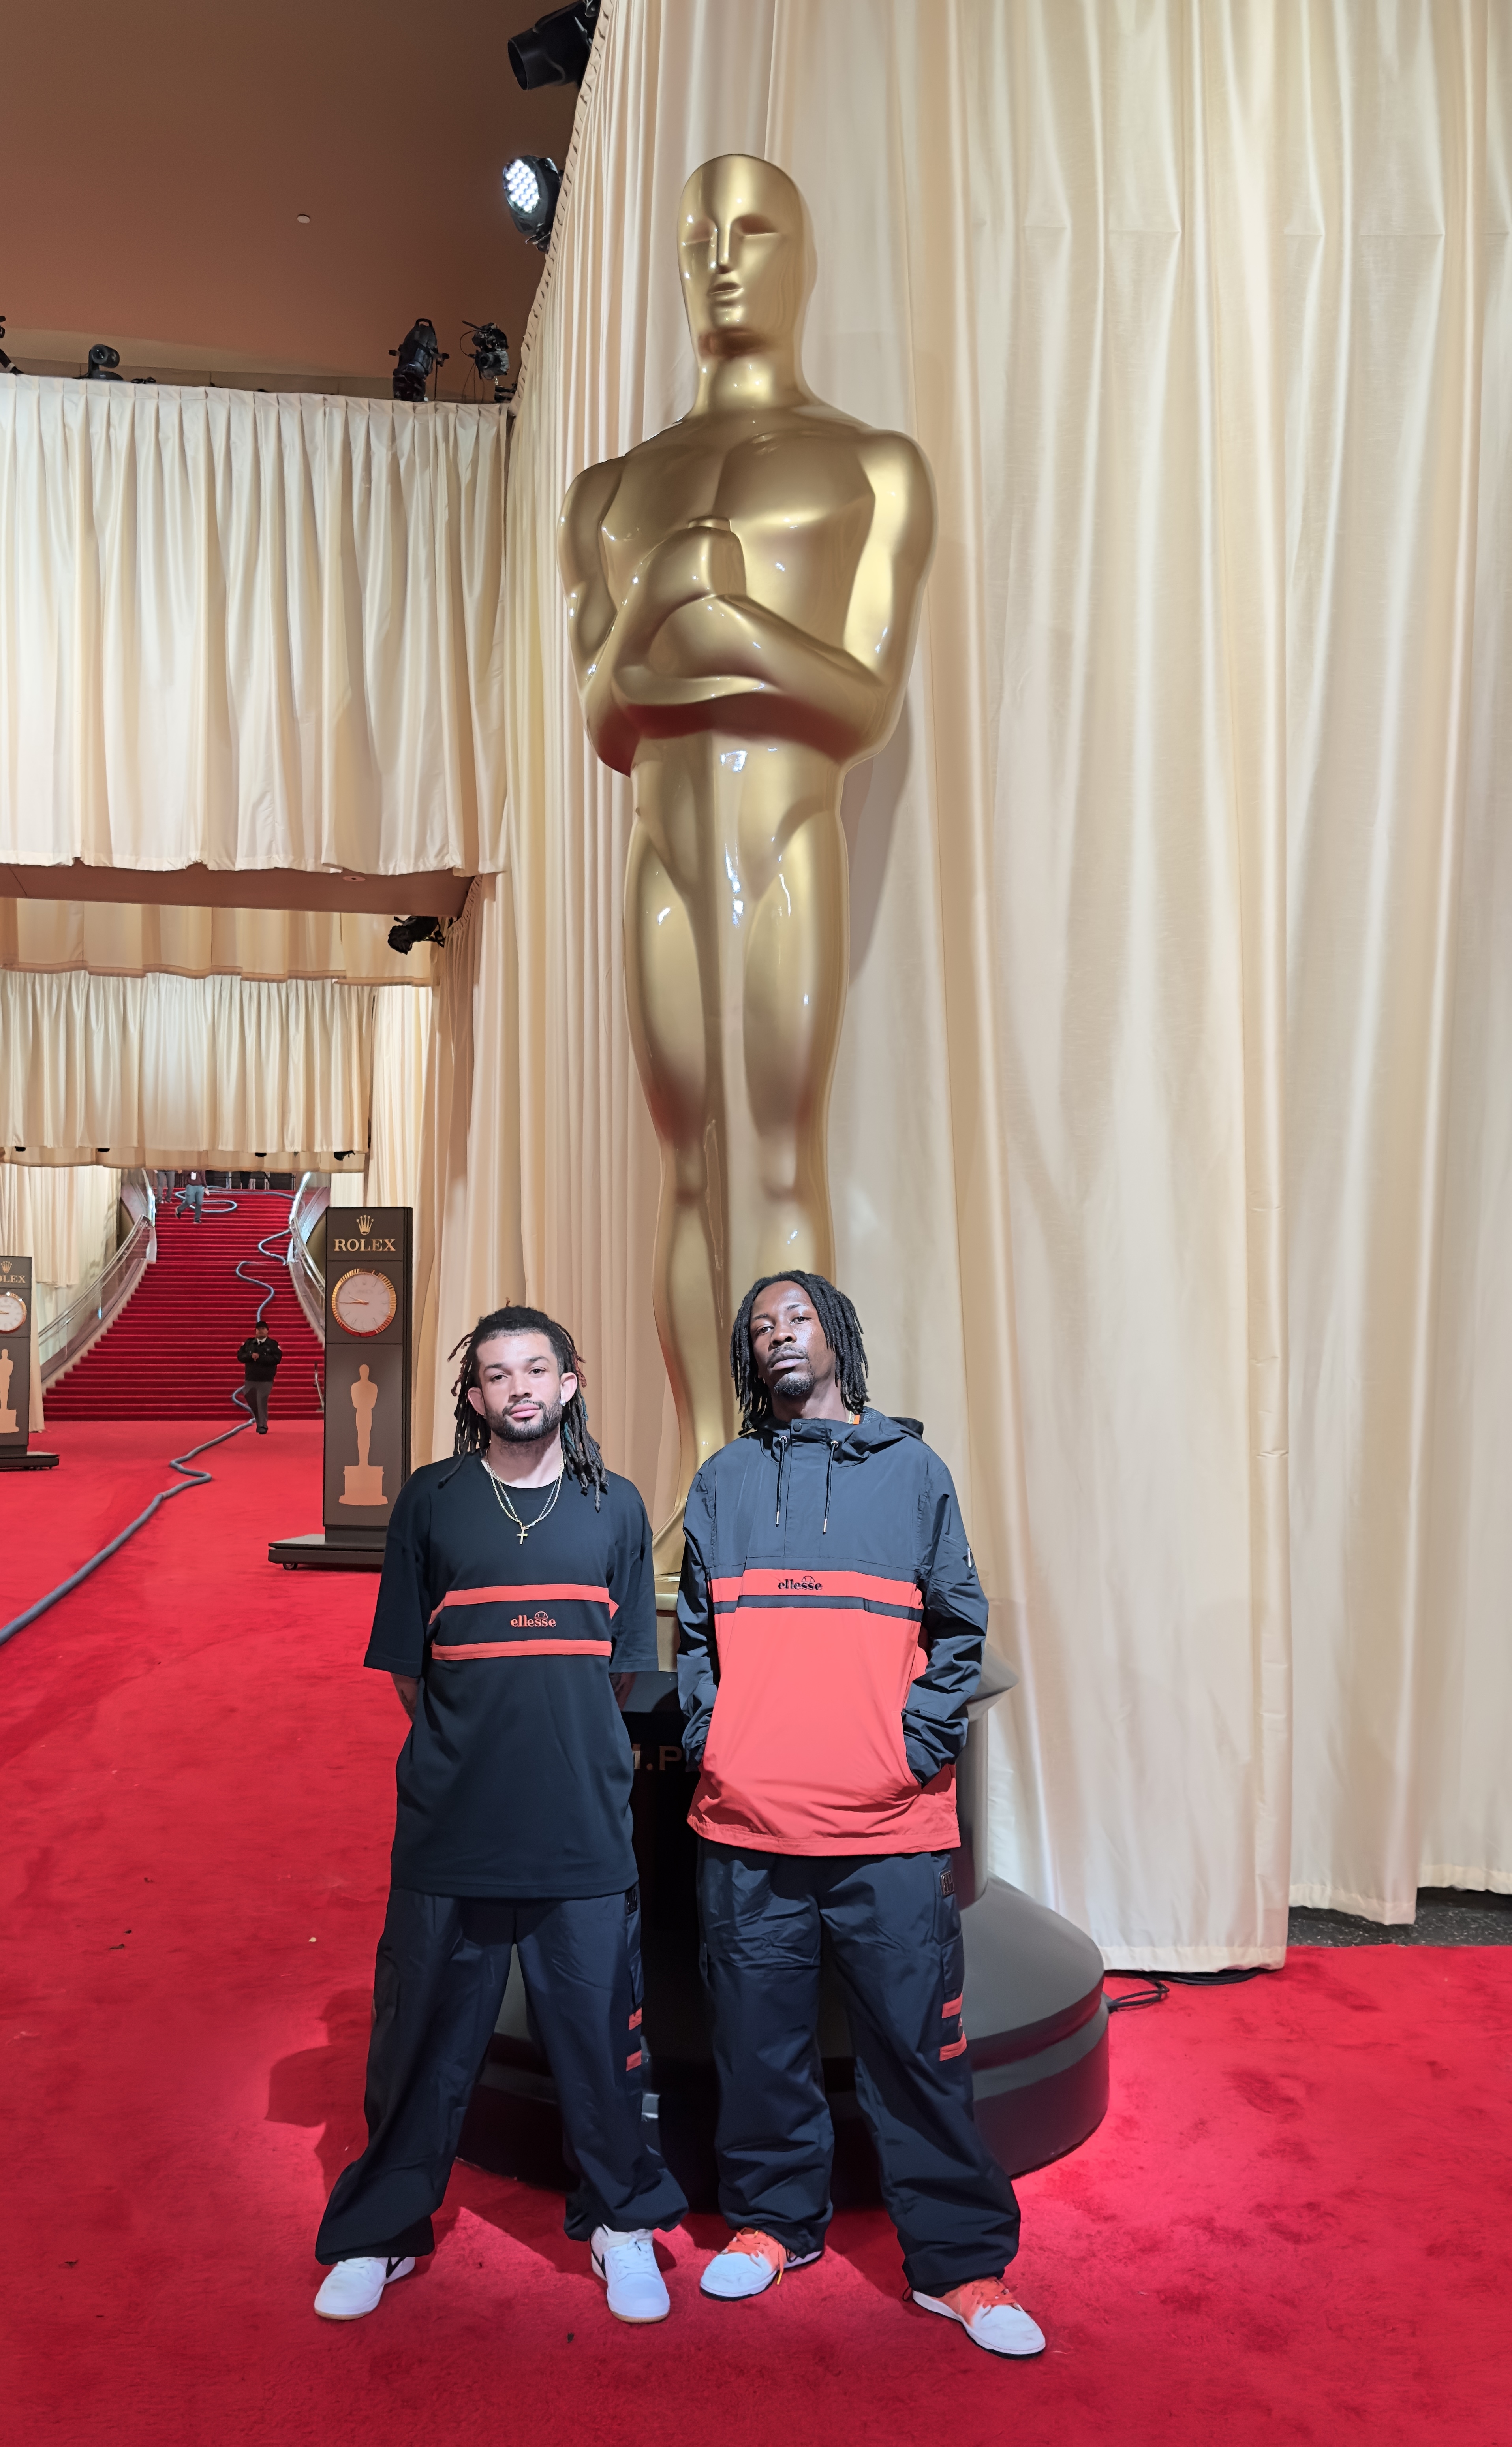 Two individuals in casual black and red attire standing in front of a large Oscar statue on a red carpet